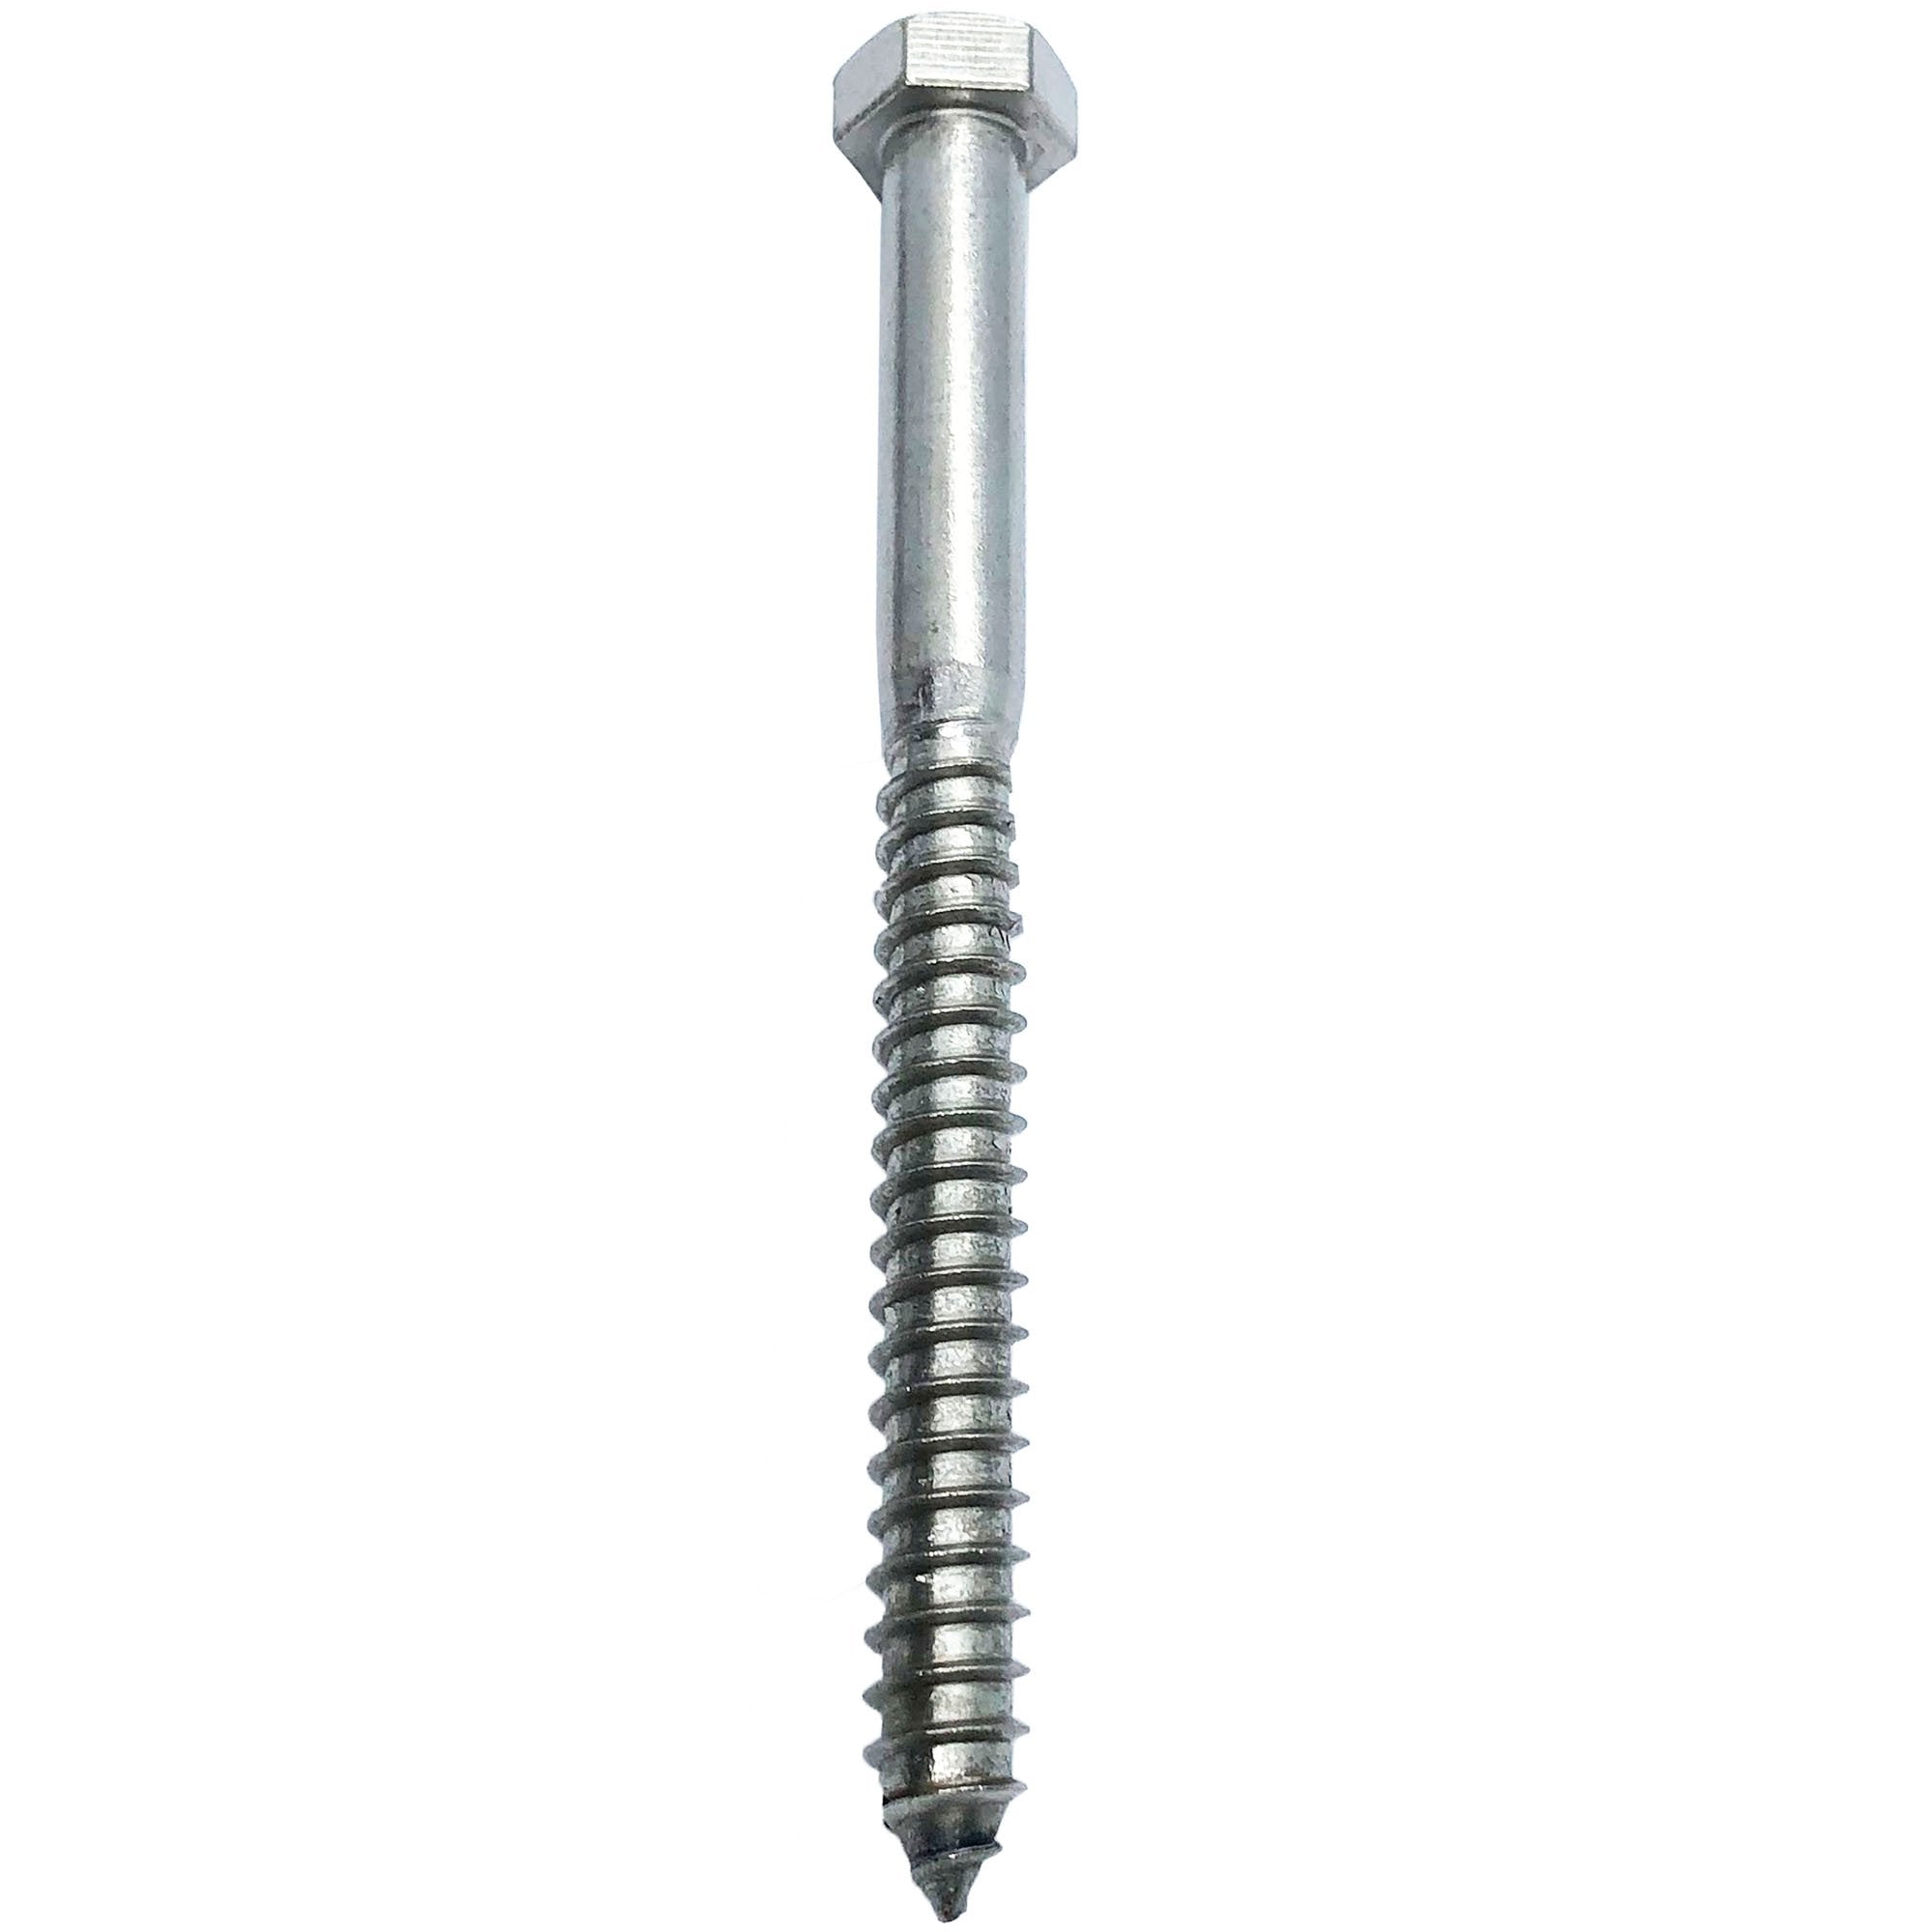 3/8 x 6 - 304 Grade Stainless Steel Lag Screws, Hex Head Fasteners, Stainless Steel Screw. Use As Construction, Wood, Metal, Lag Screw or Mounting